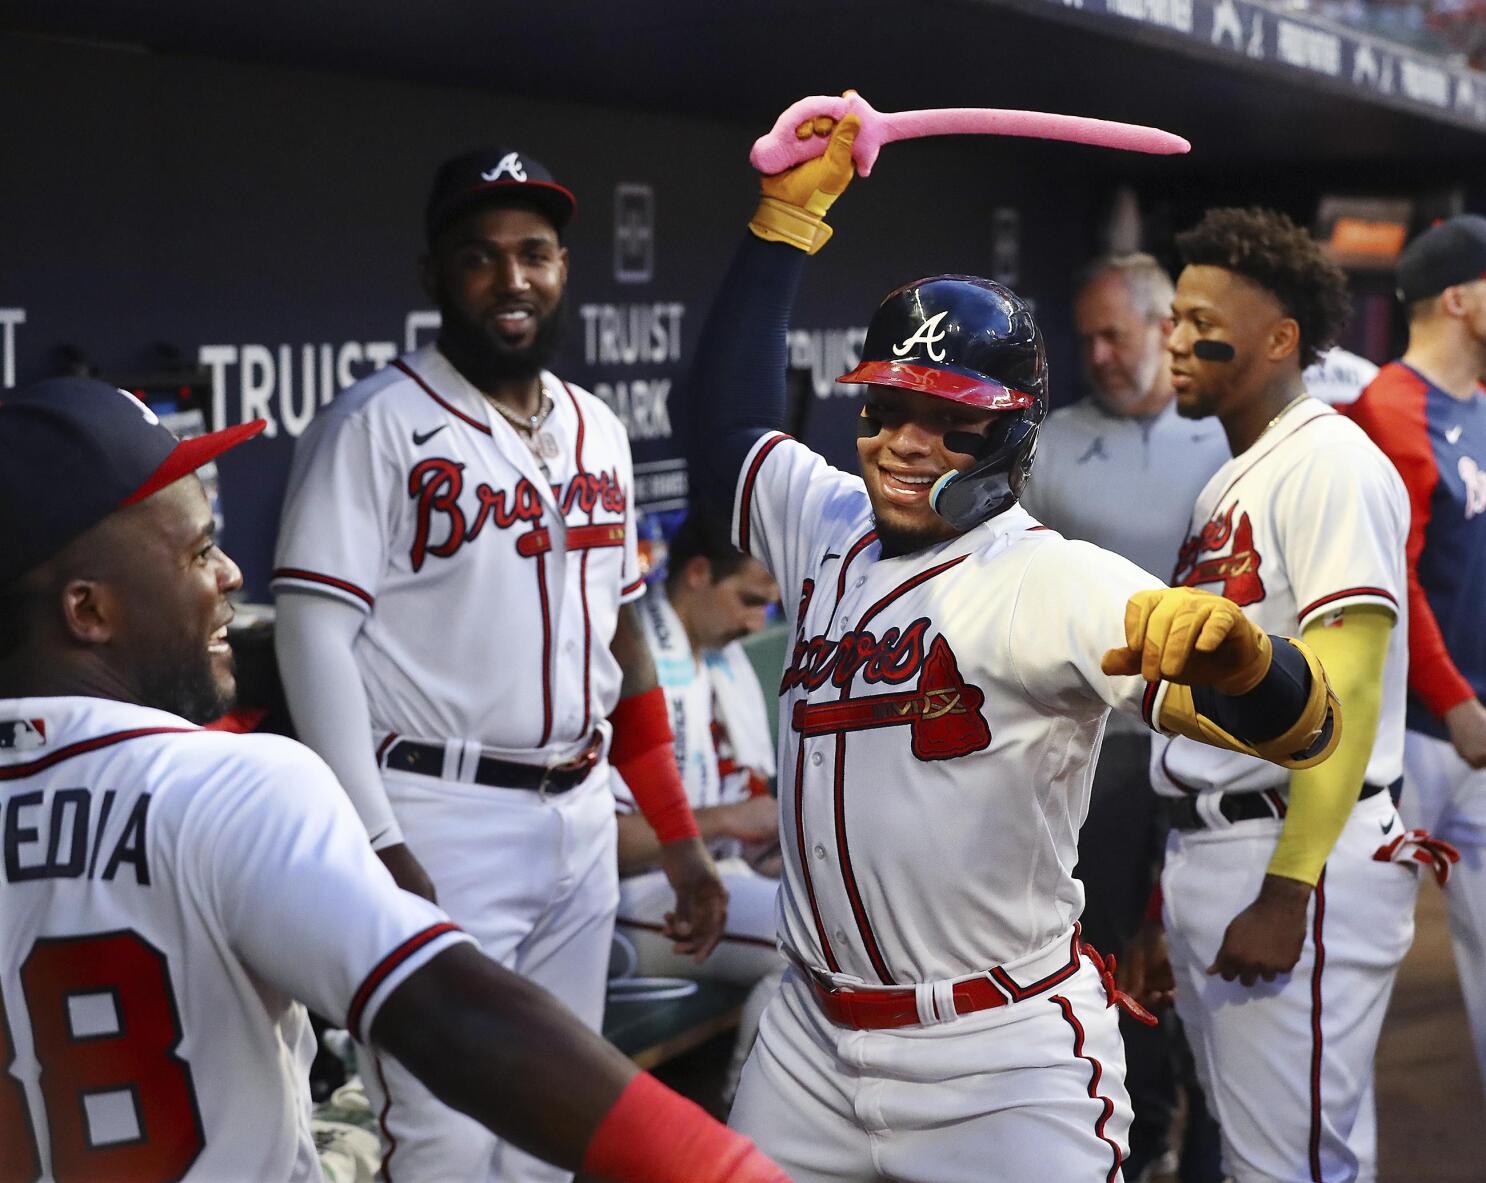 Ozzie Albies carrying the mantle for Curaçao in Atlanta